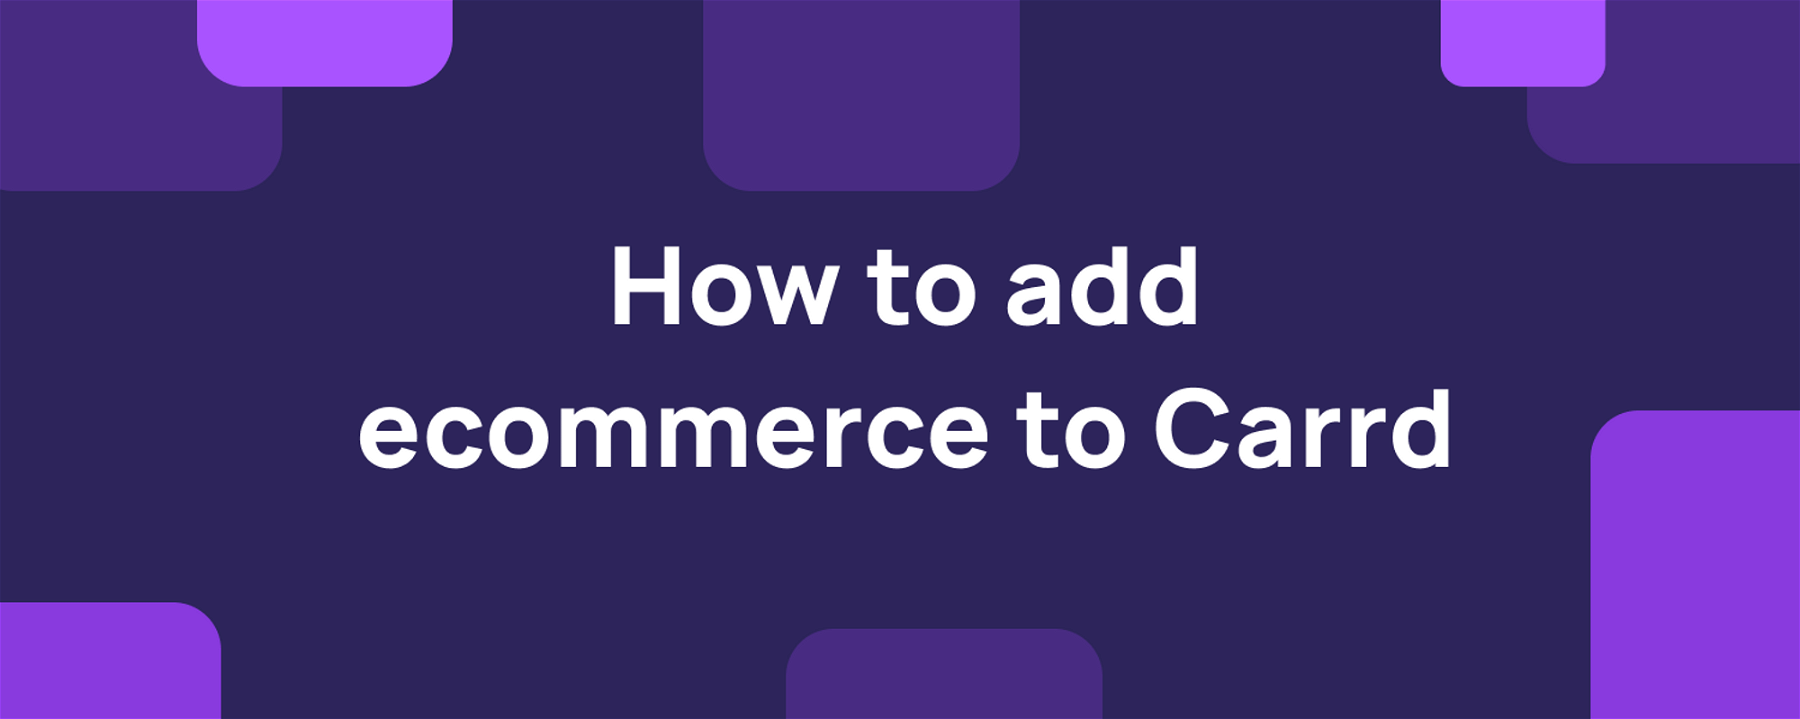 How to add ecommerce to Carrd